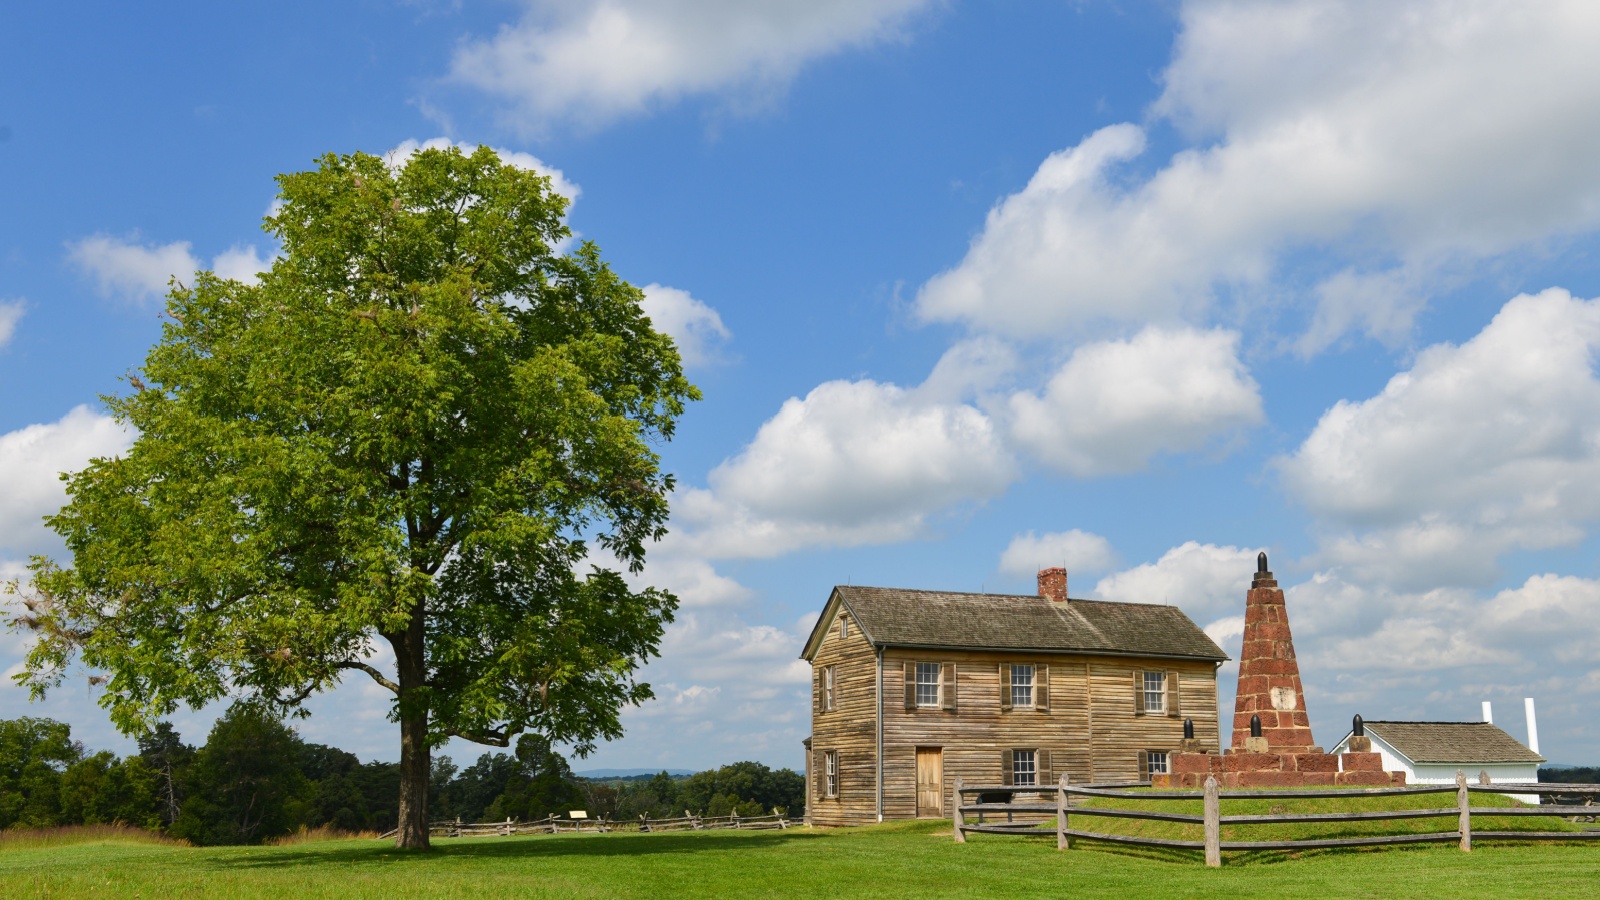 image credit: Orhan Cam/Shutterstock <p>Known for two significant battles, First and Second Manassas (Bull Run), this site marks the first major land battle of the Civil War. The National Battlefield Park now serves as a poignant educational resource with trails, exhibits, and live demonstrations. Tourists can explore the ground where generals first tested their mettle and tactics in the early stages of the war.</p>